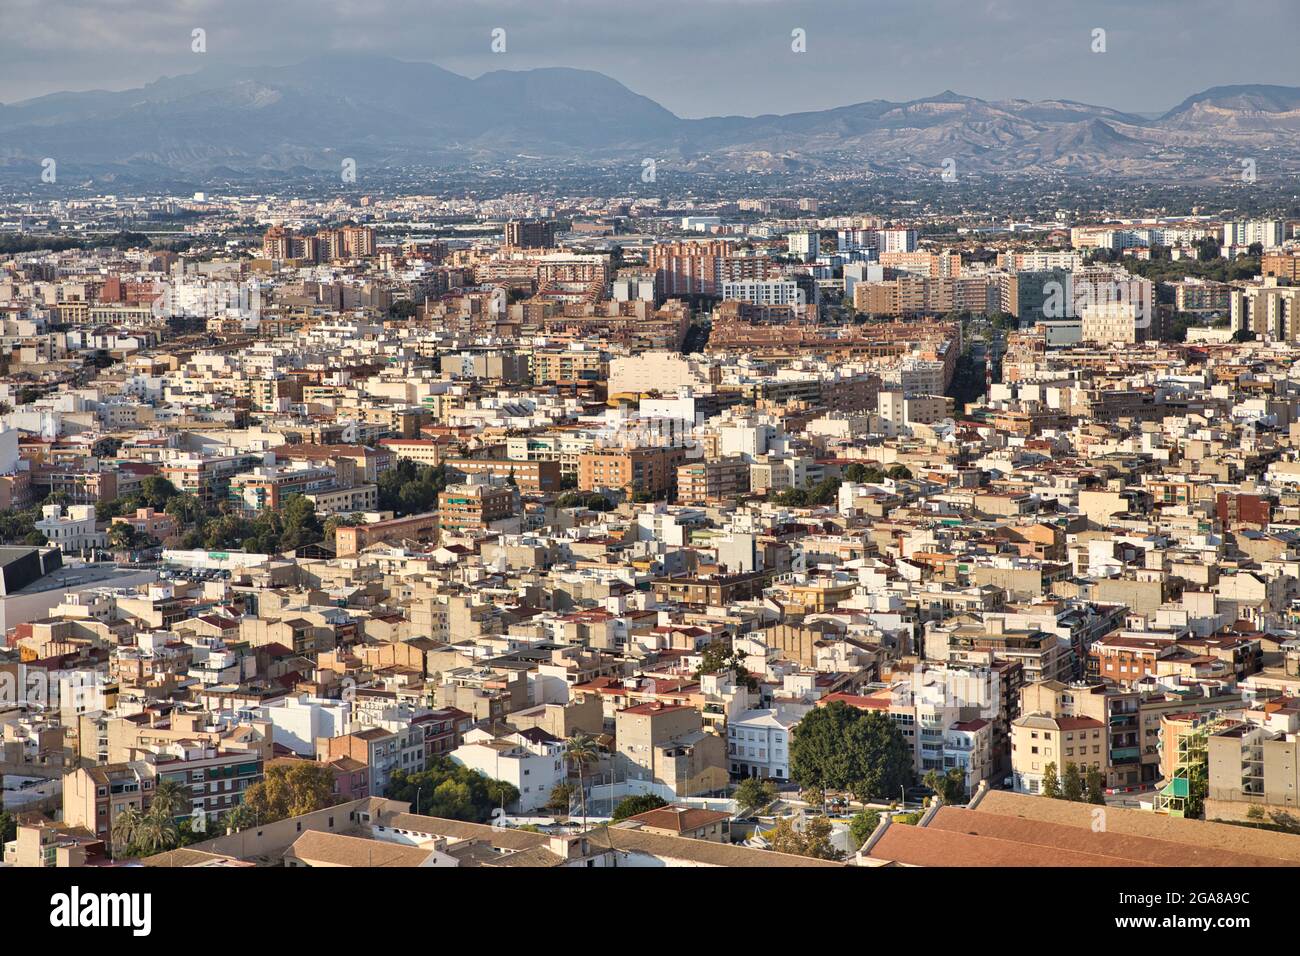 An aerial view westwards of Alicante city from the castle of Santa Barbara high up on a promontory, Alicante, Spain Stock Photo